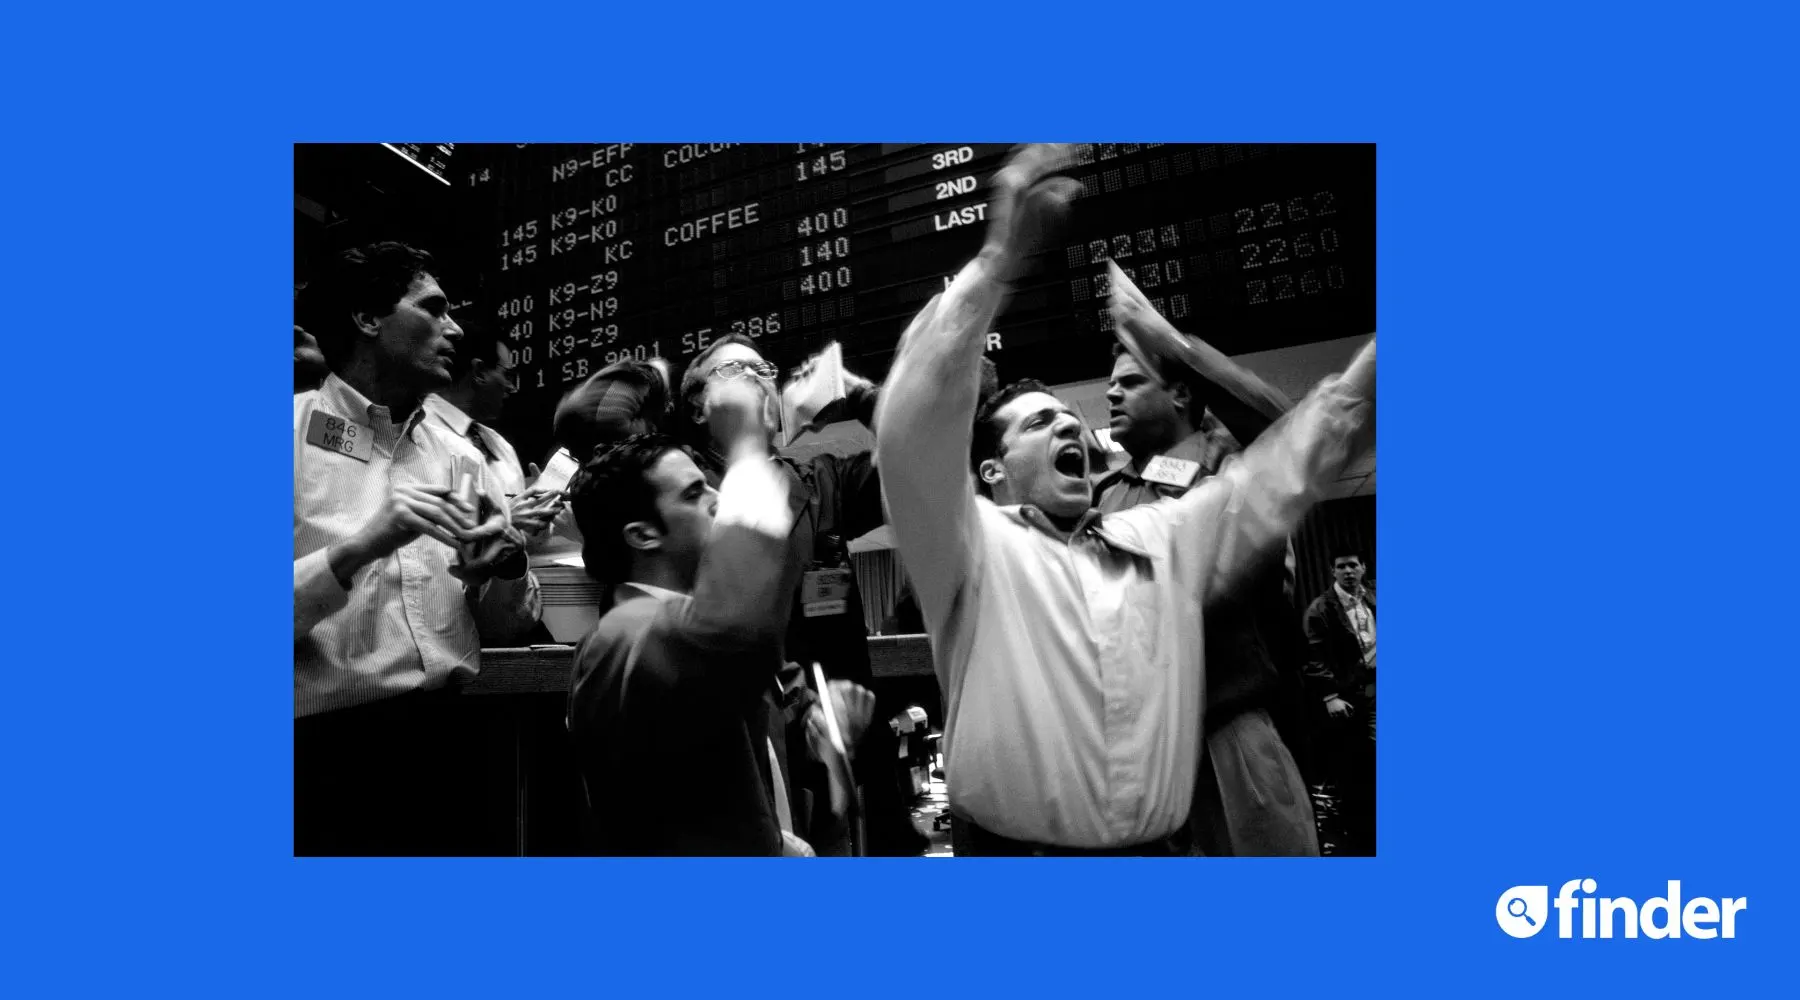 Traders_getty_1800x1000